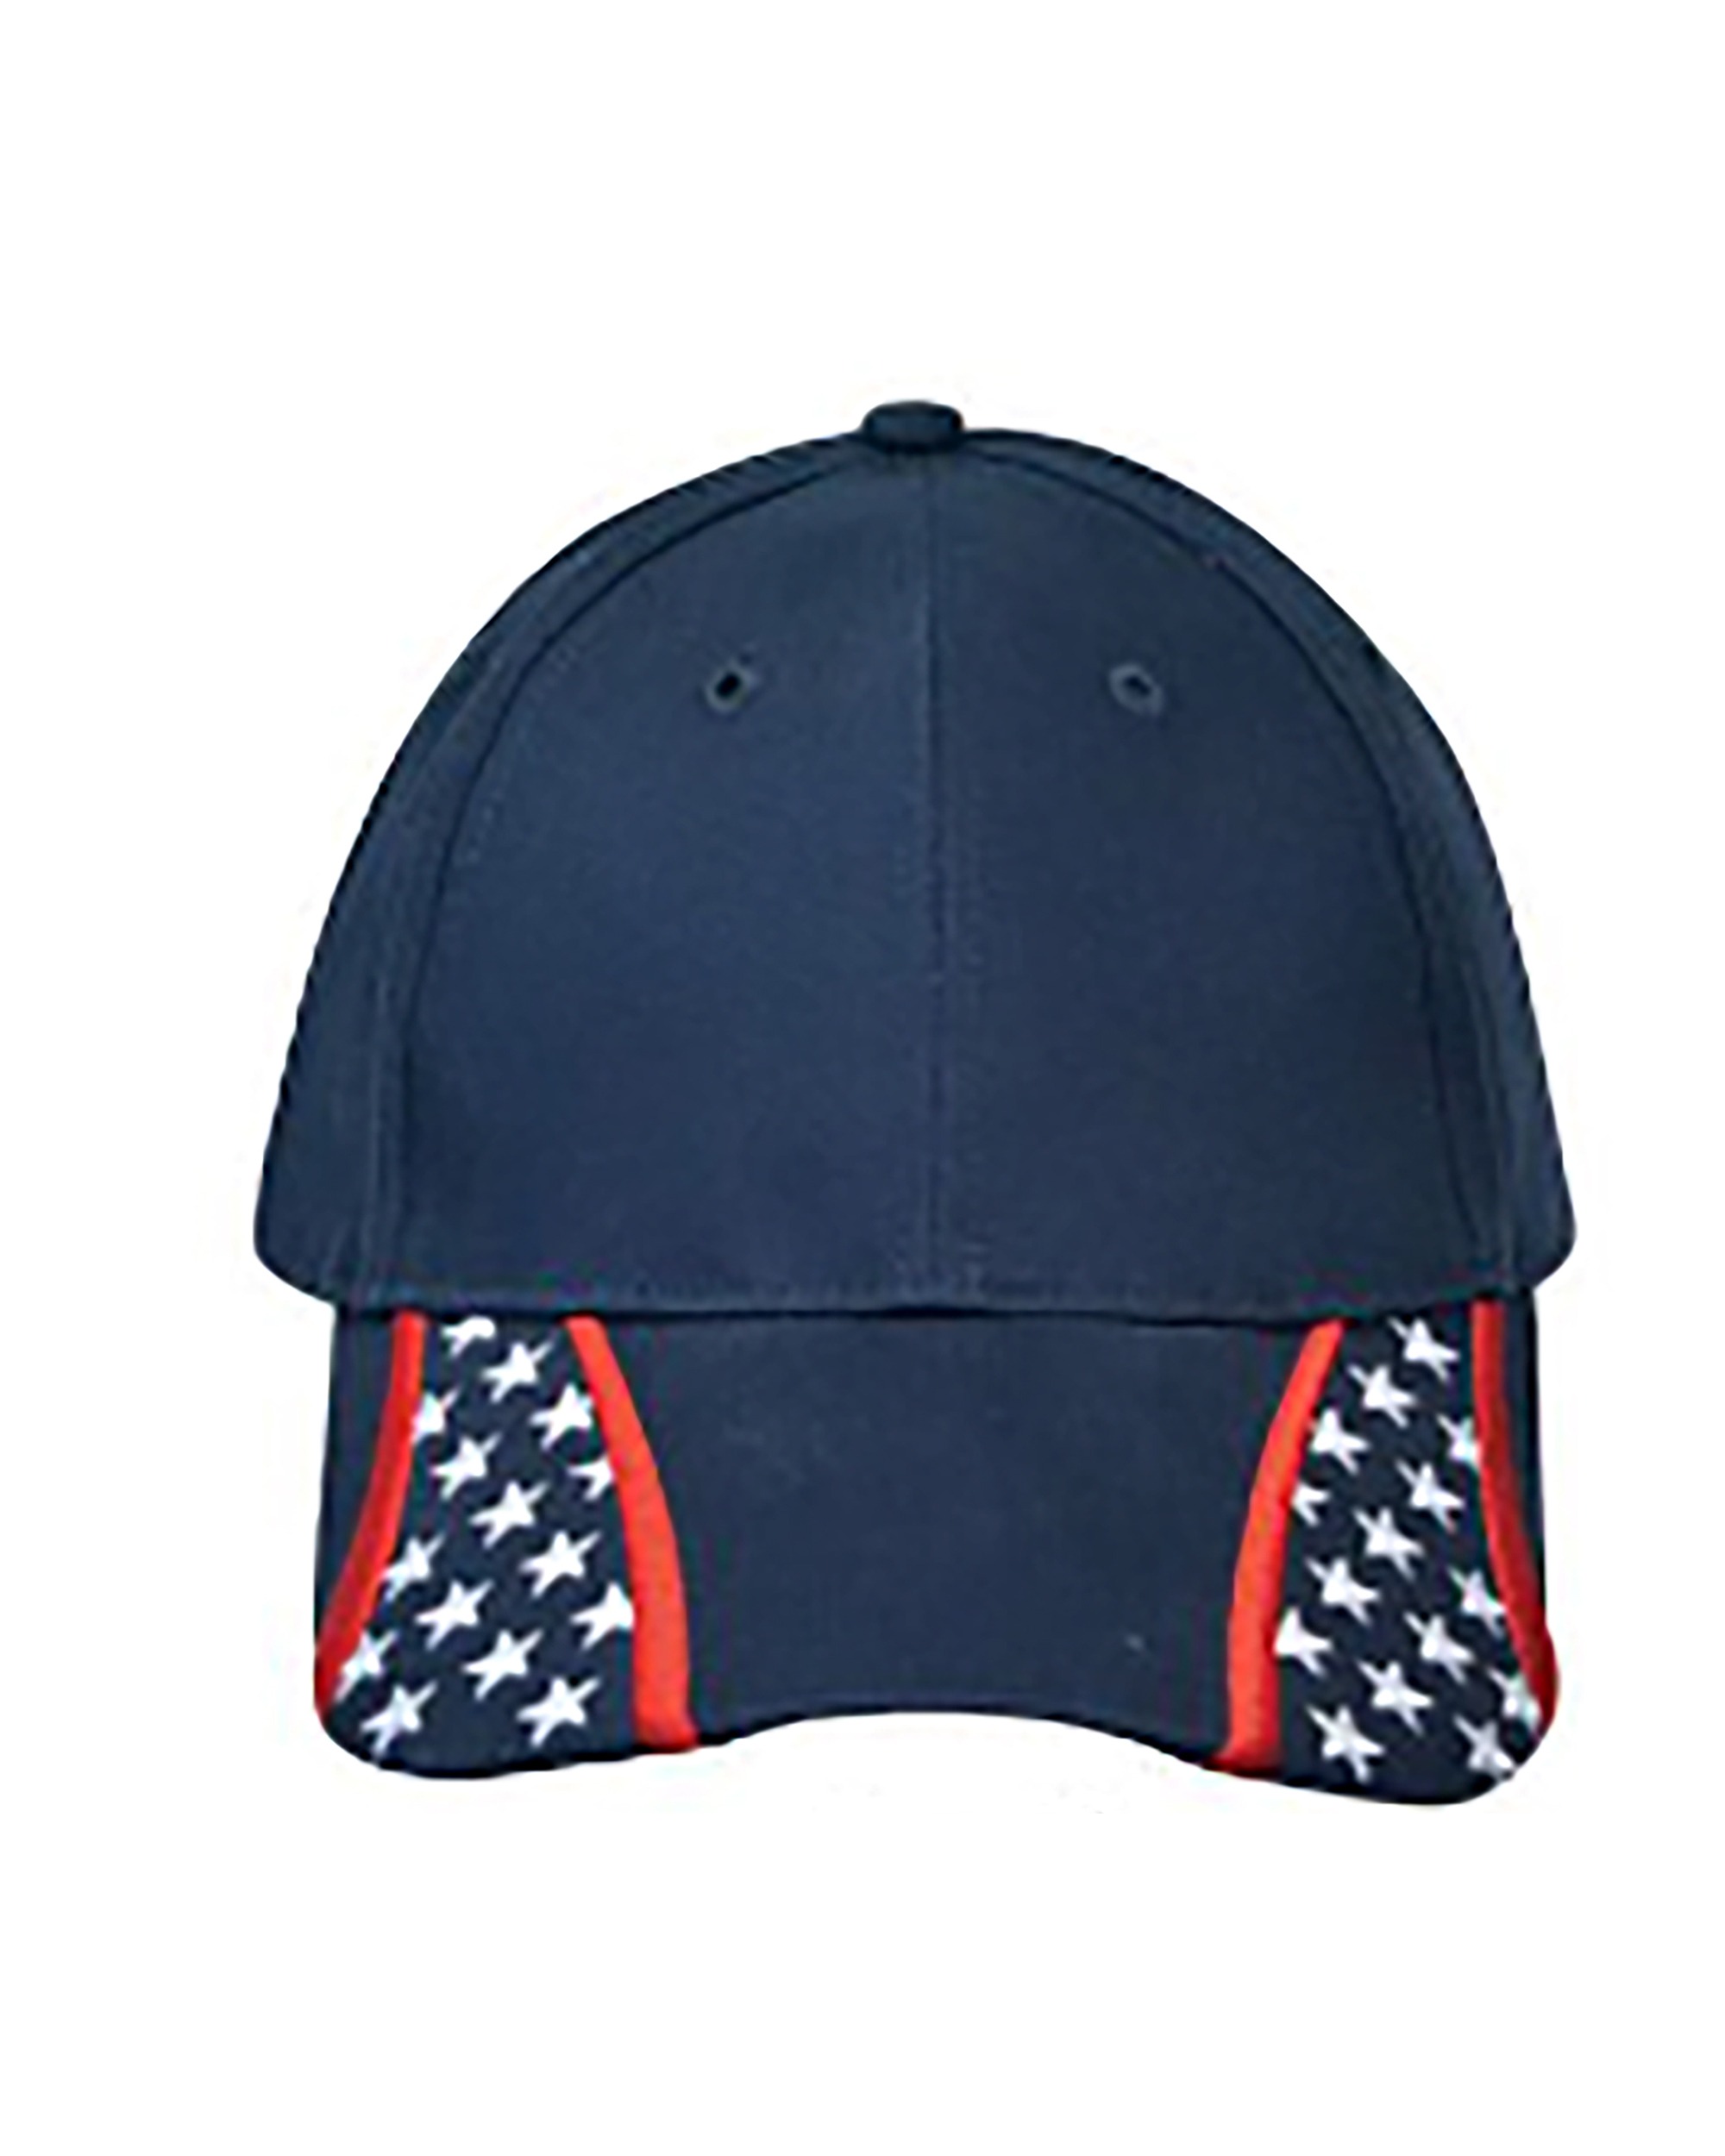 EastWest Embroidery AS05 American Spirit Cap